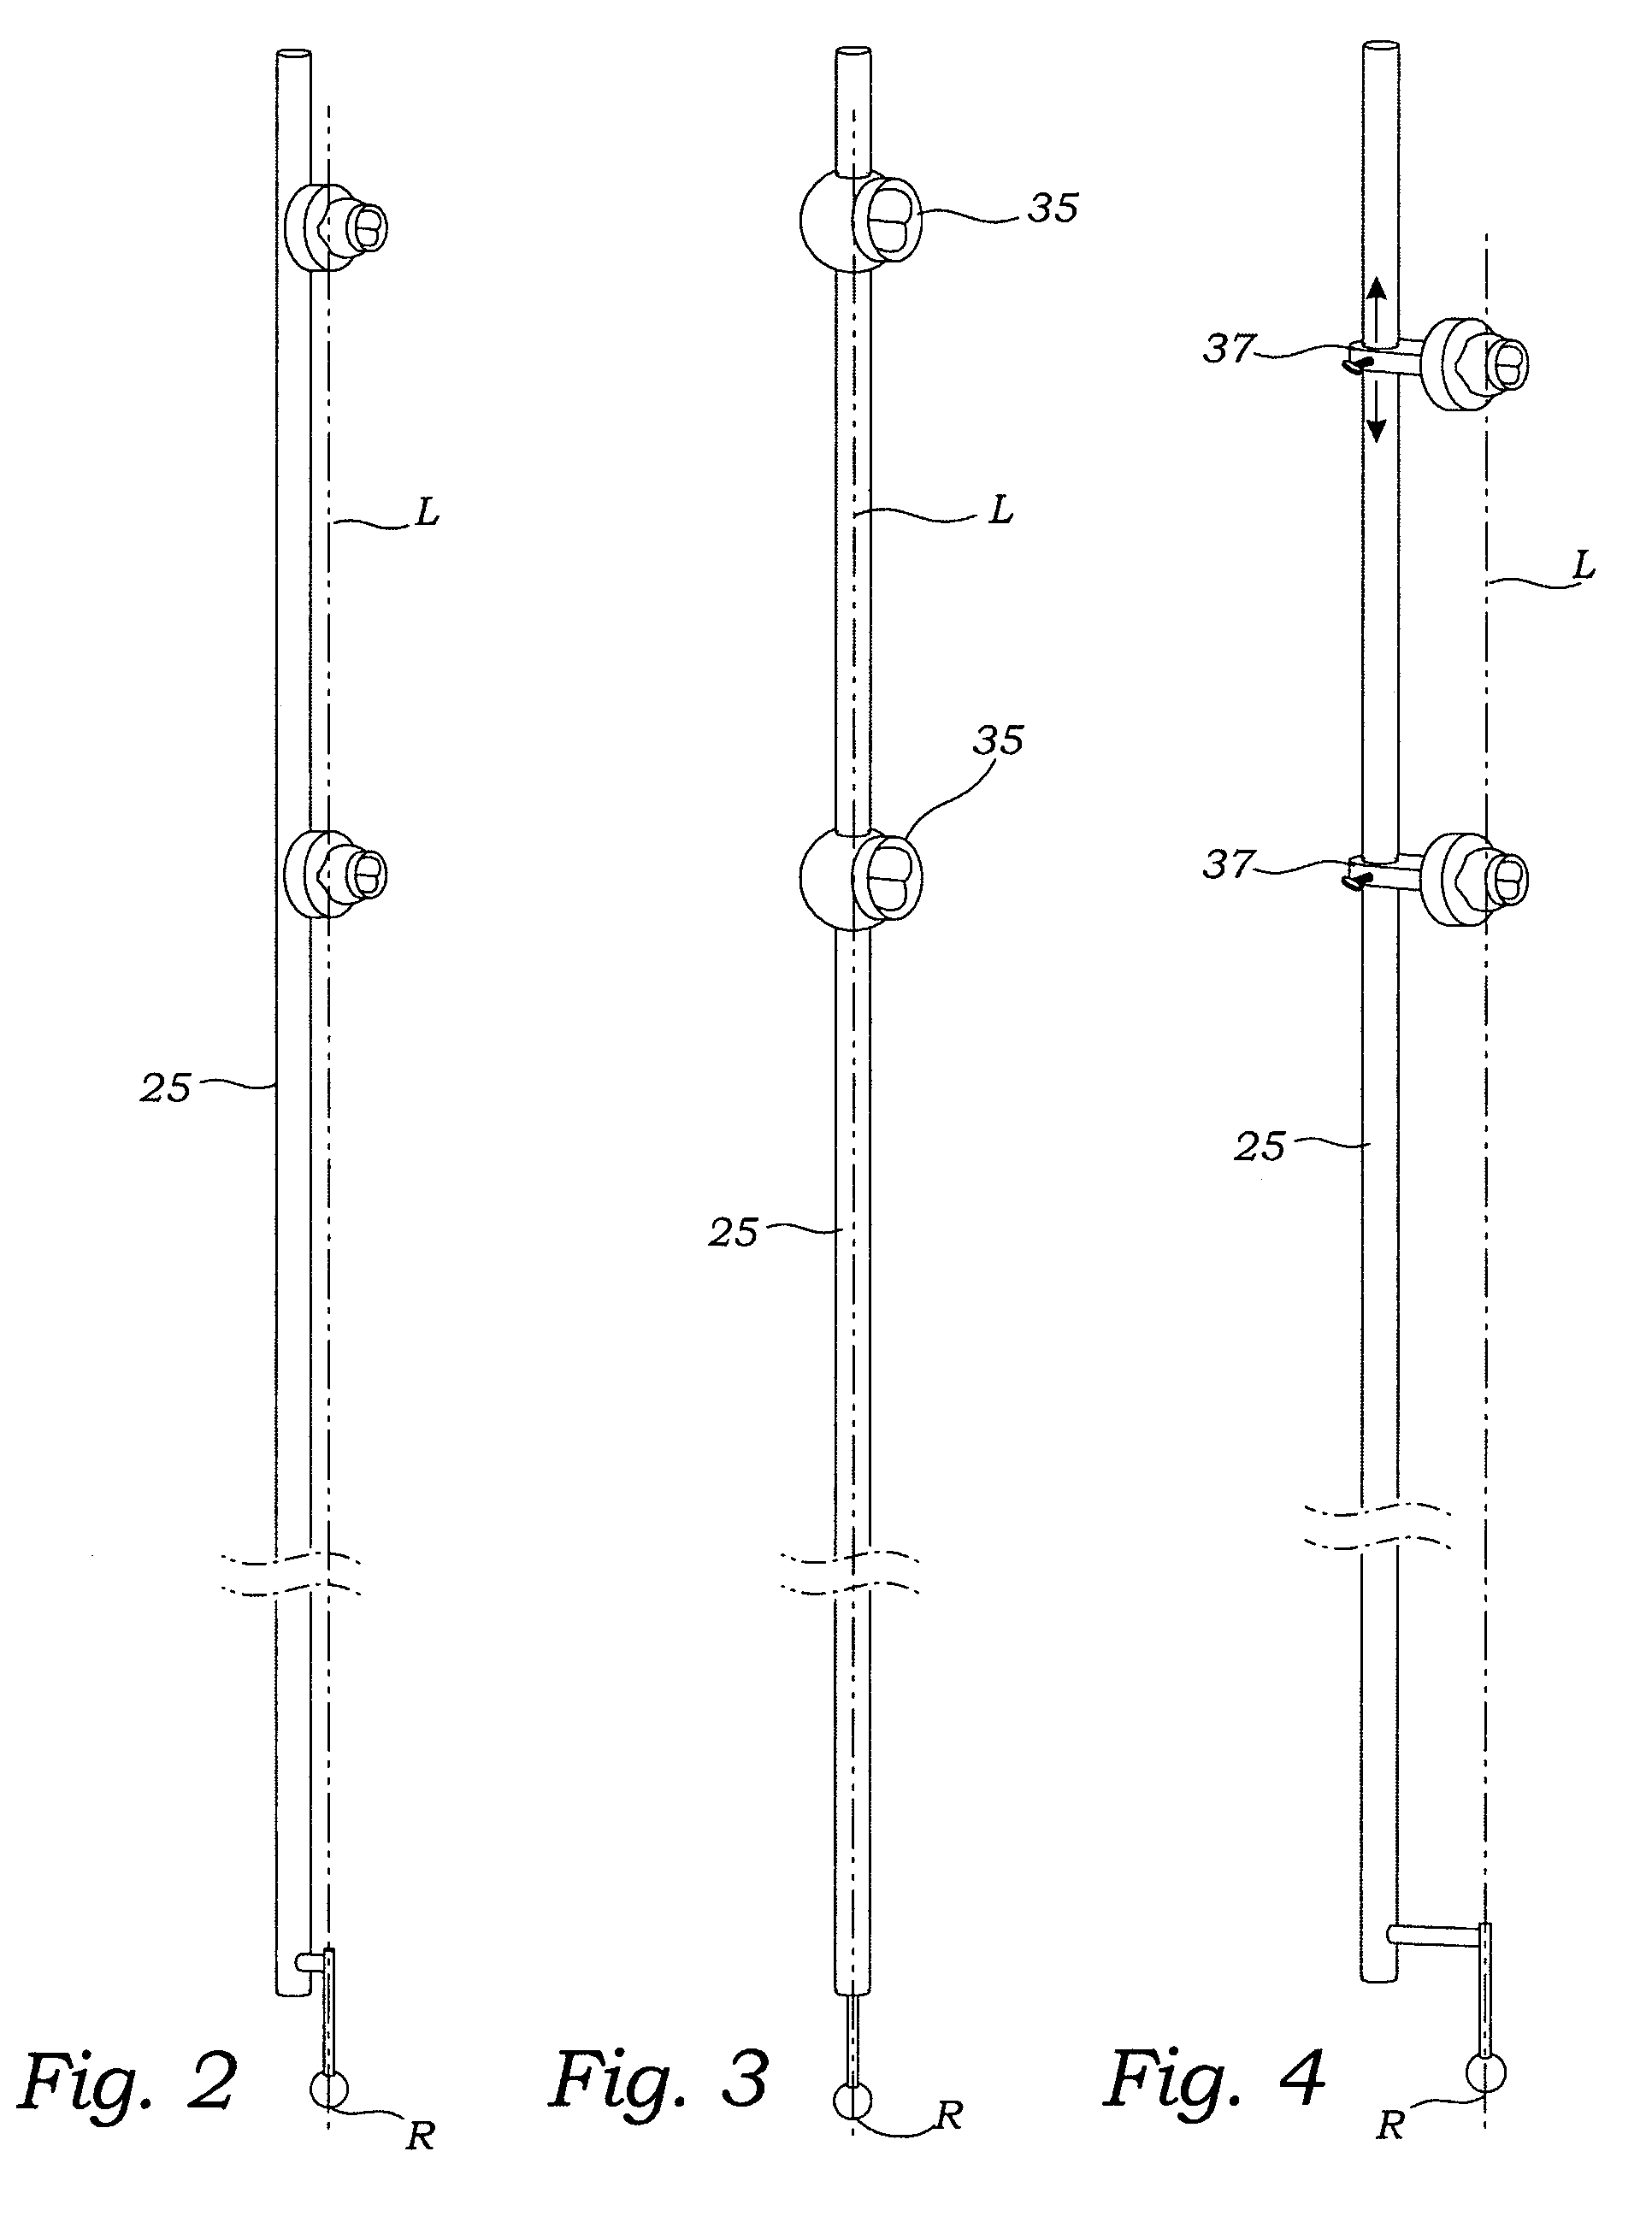 Coordinate tracking system, apparatus and method of use